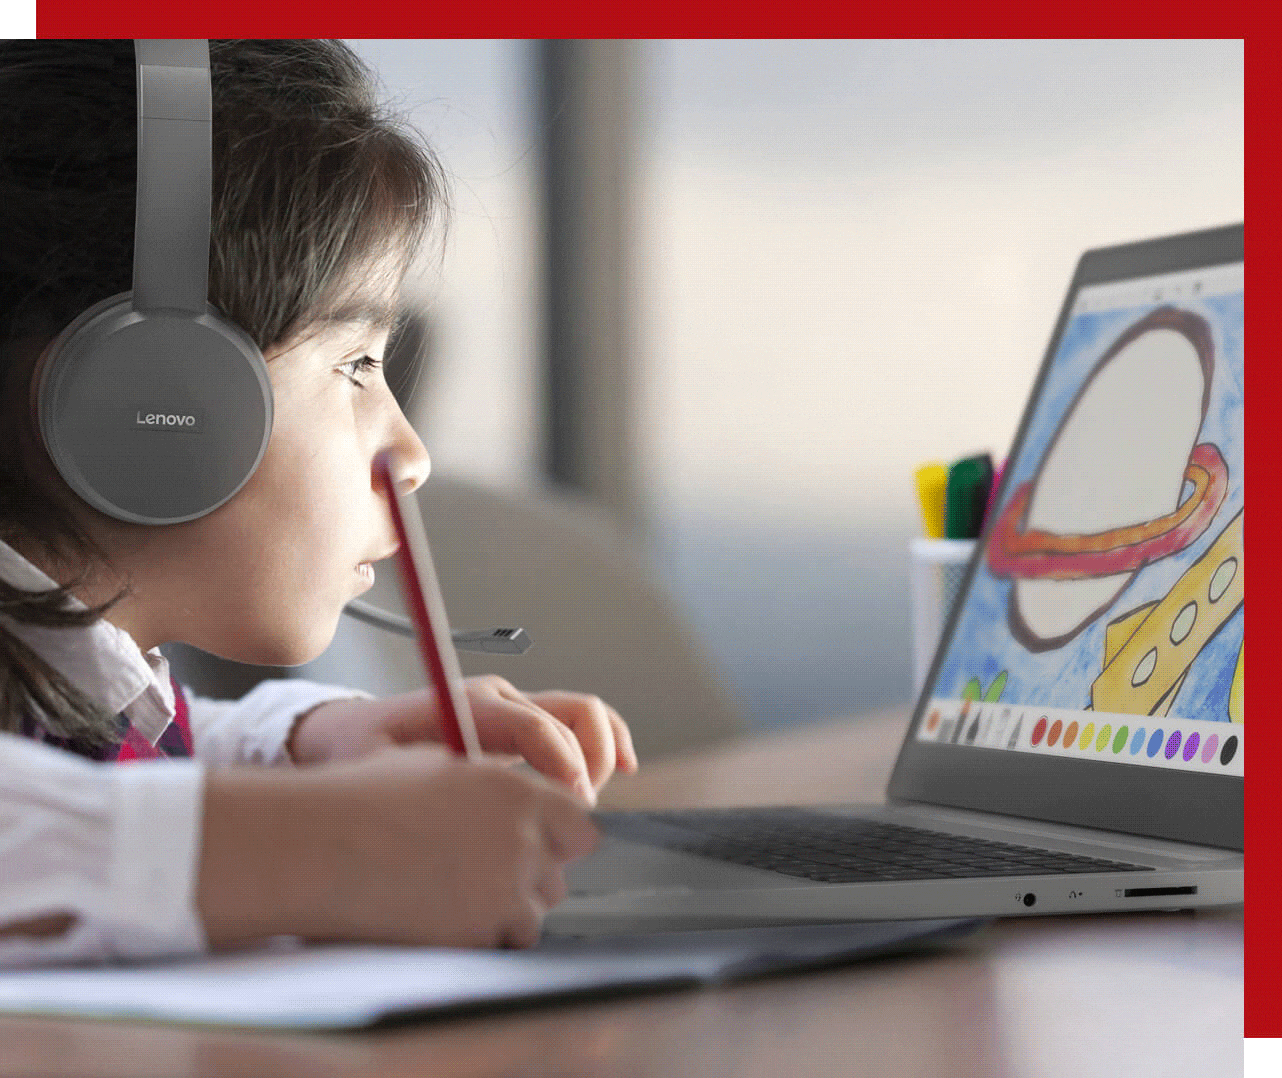 Young boy wearing headphones and working on a drawing app on a Lenovo laptop, showing a planet and a rocket changing colors between red and yellow 